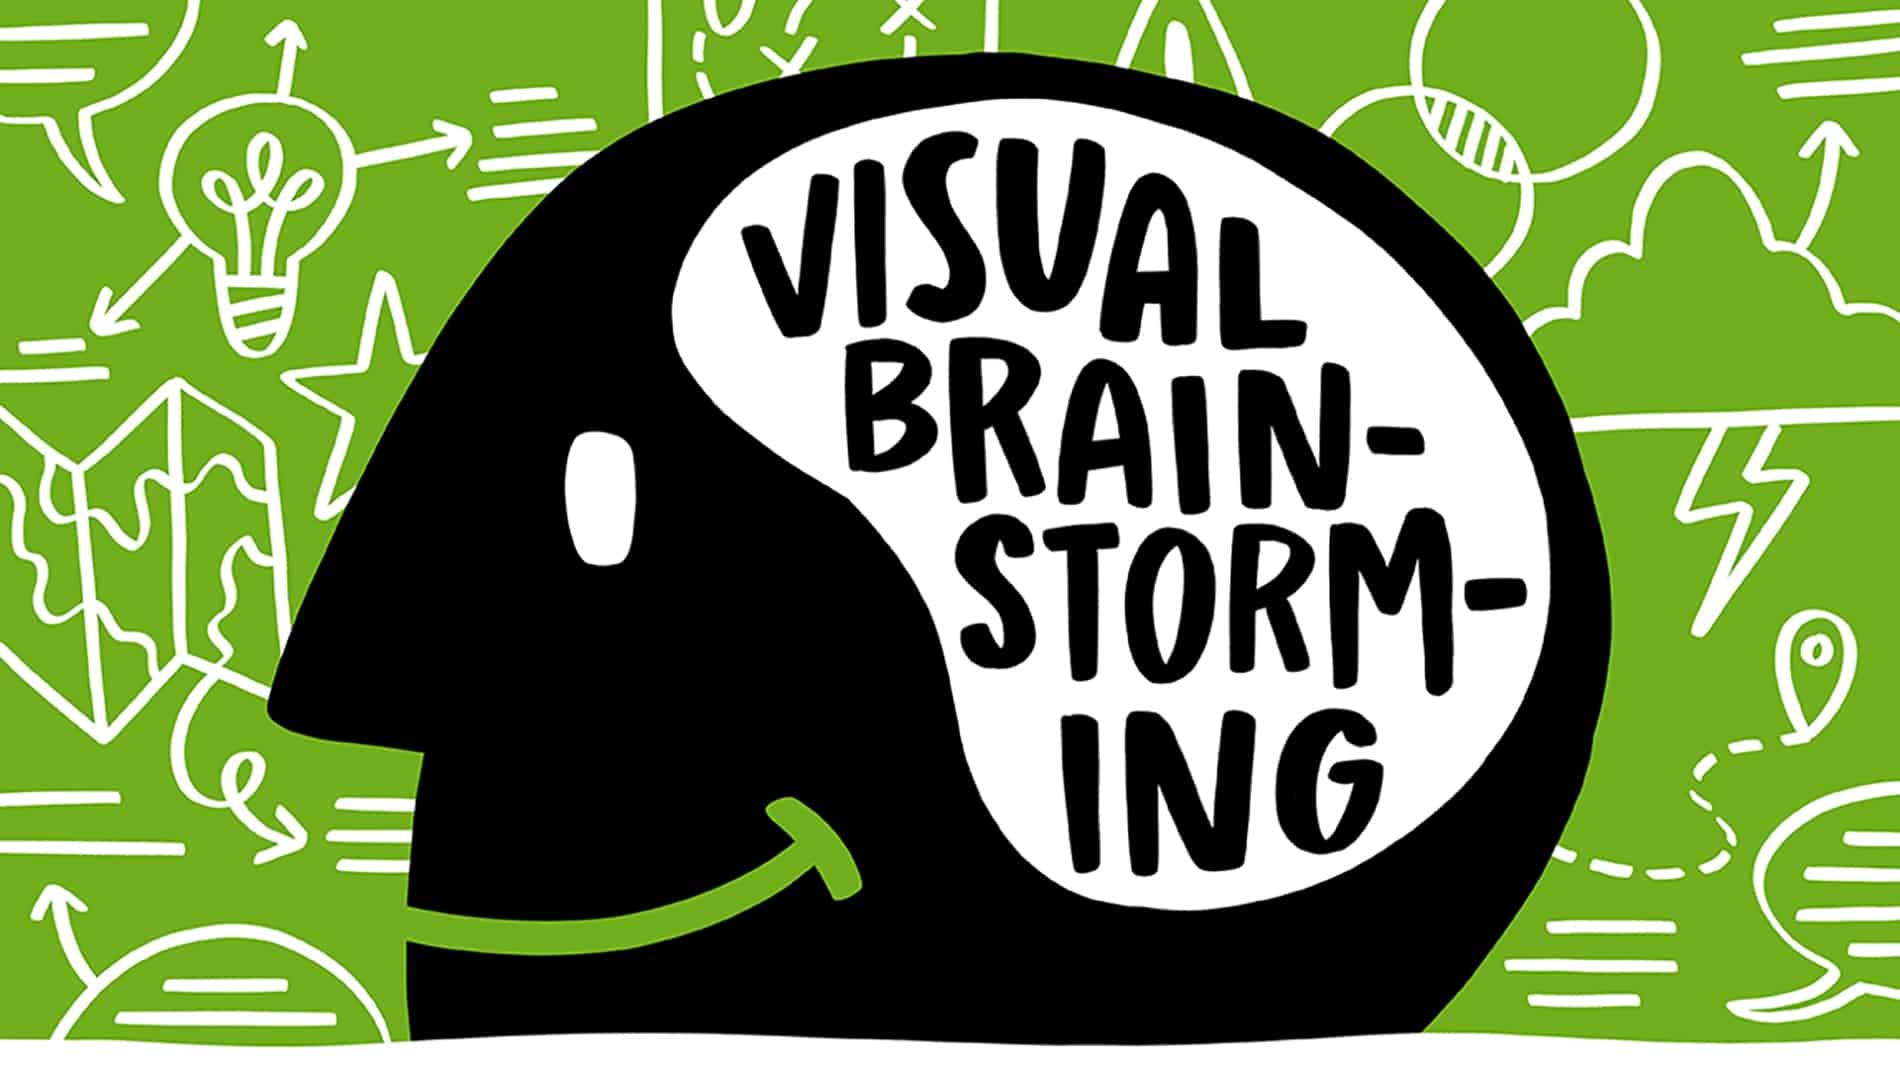 How to Use Visual Brainstorming Techniques to Develop Organized Ideas